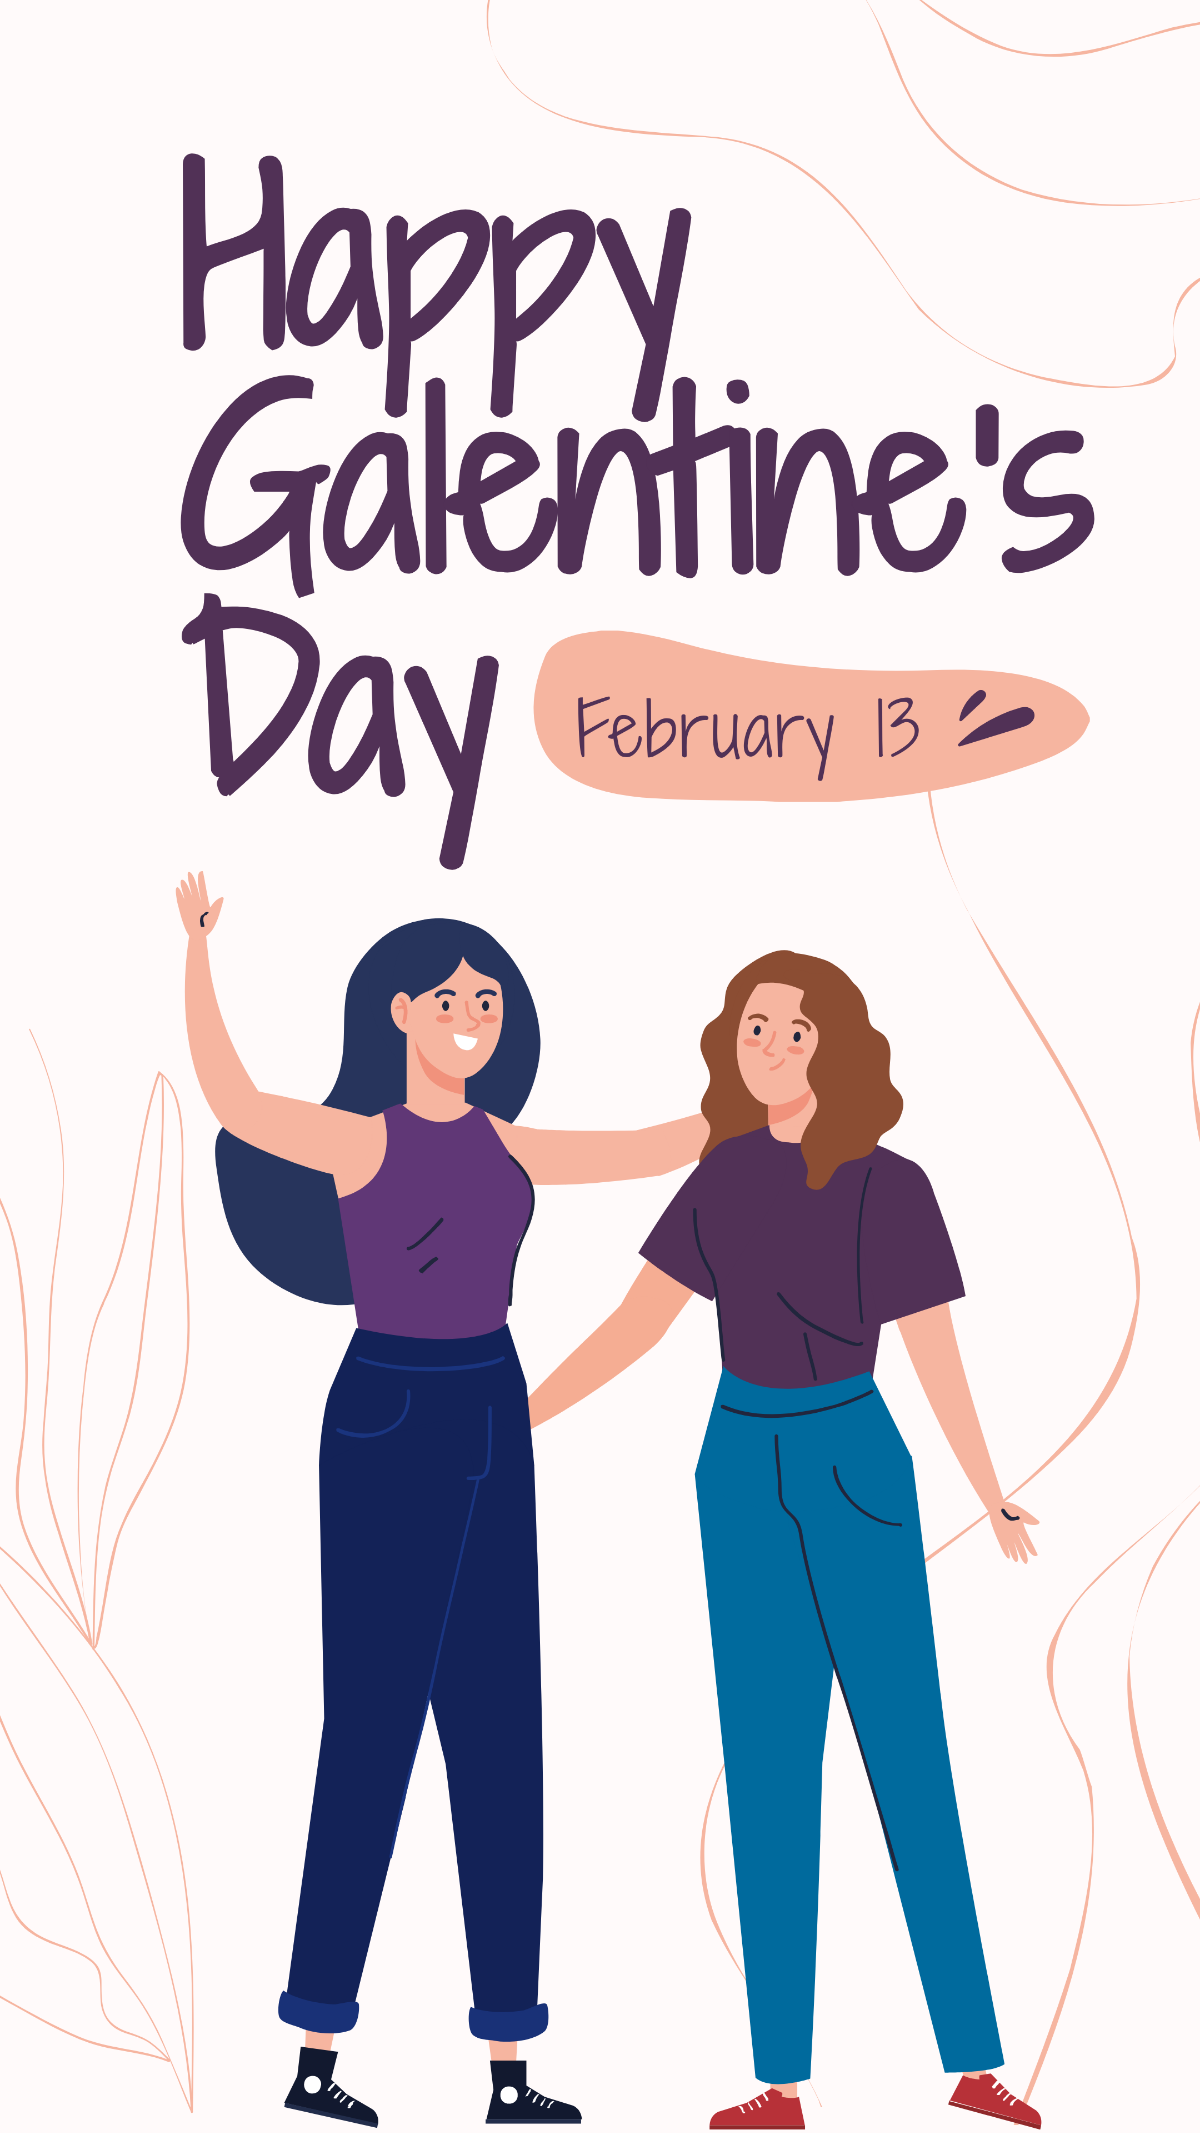 Happy Galentines Day Whatsapp Post Template